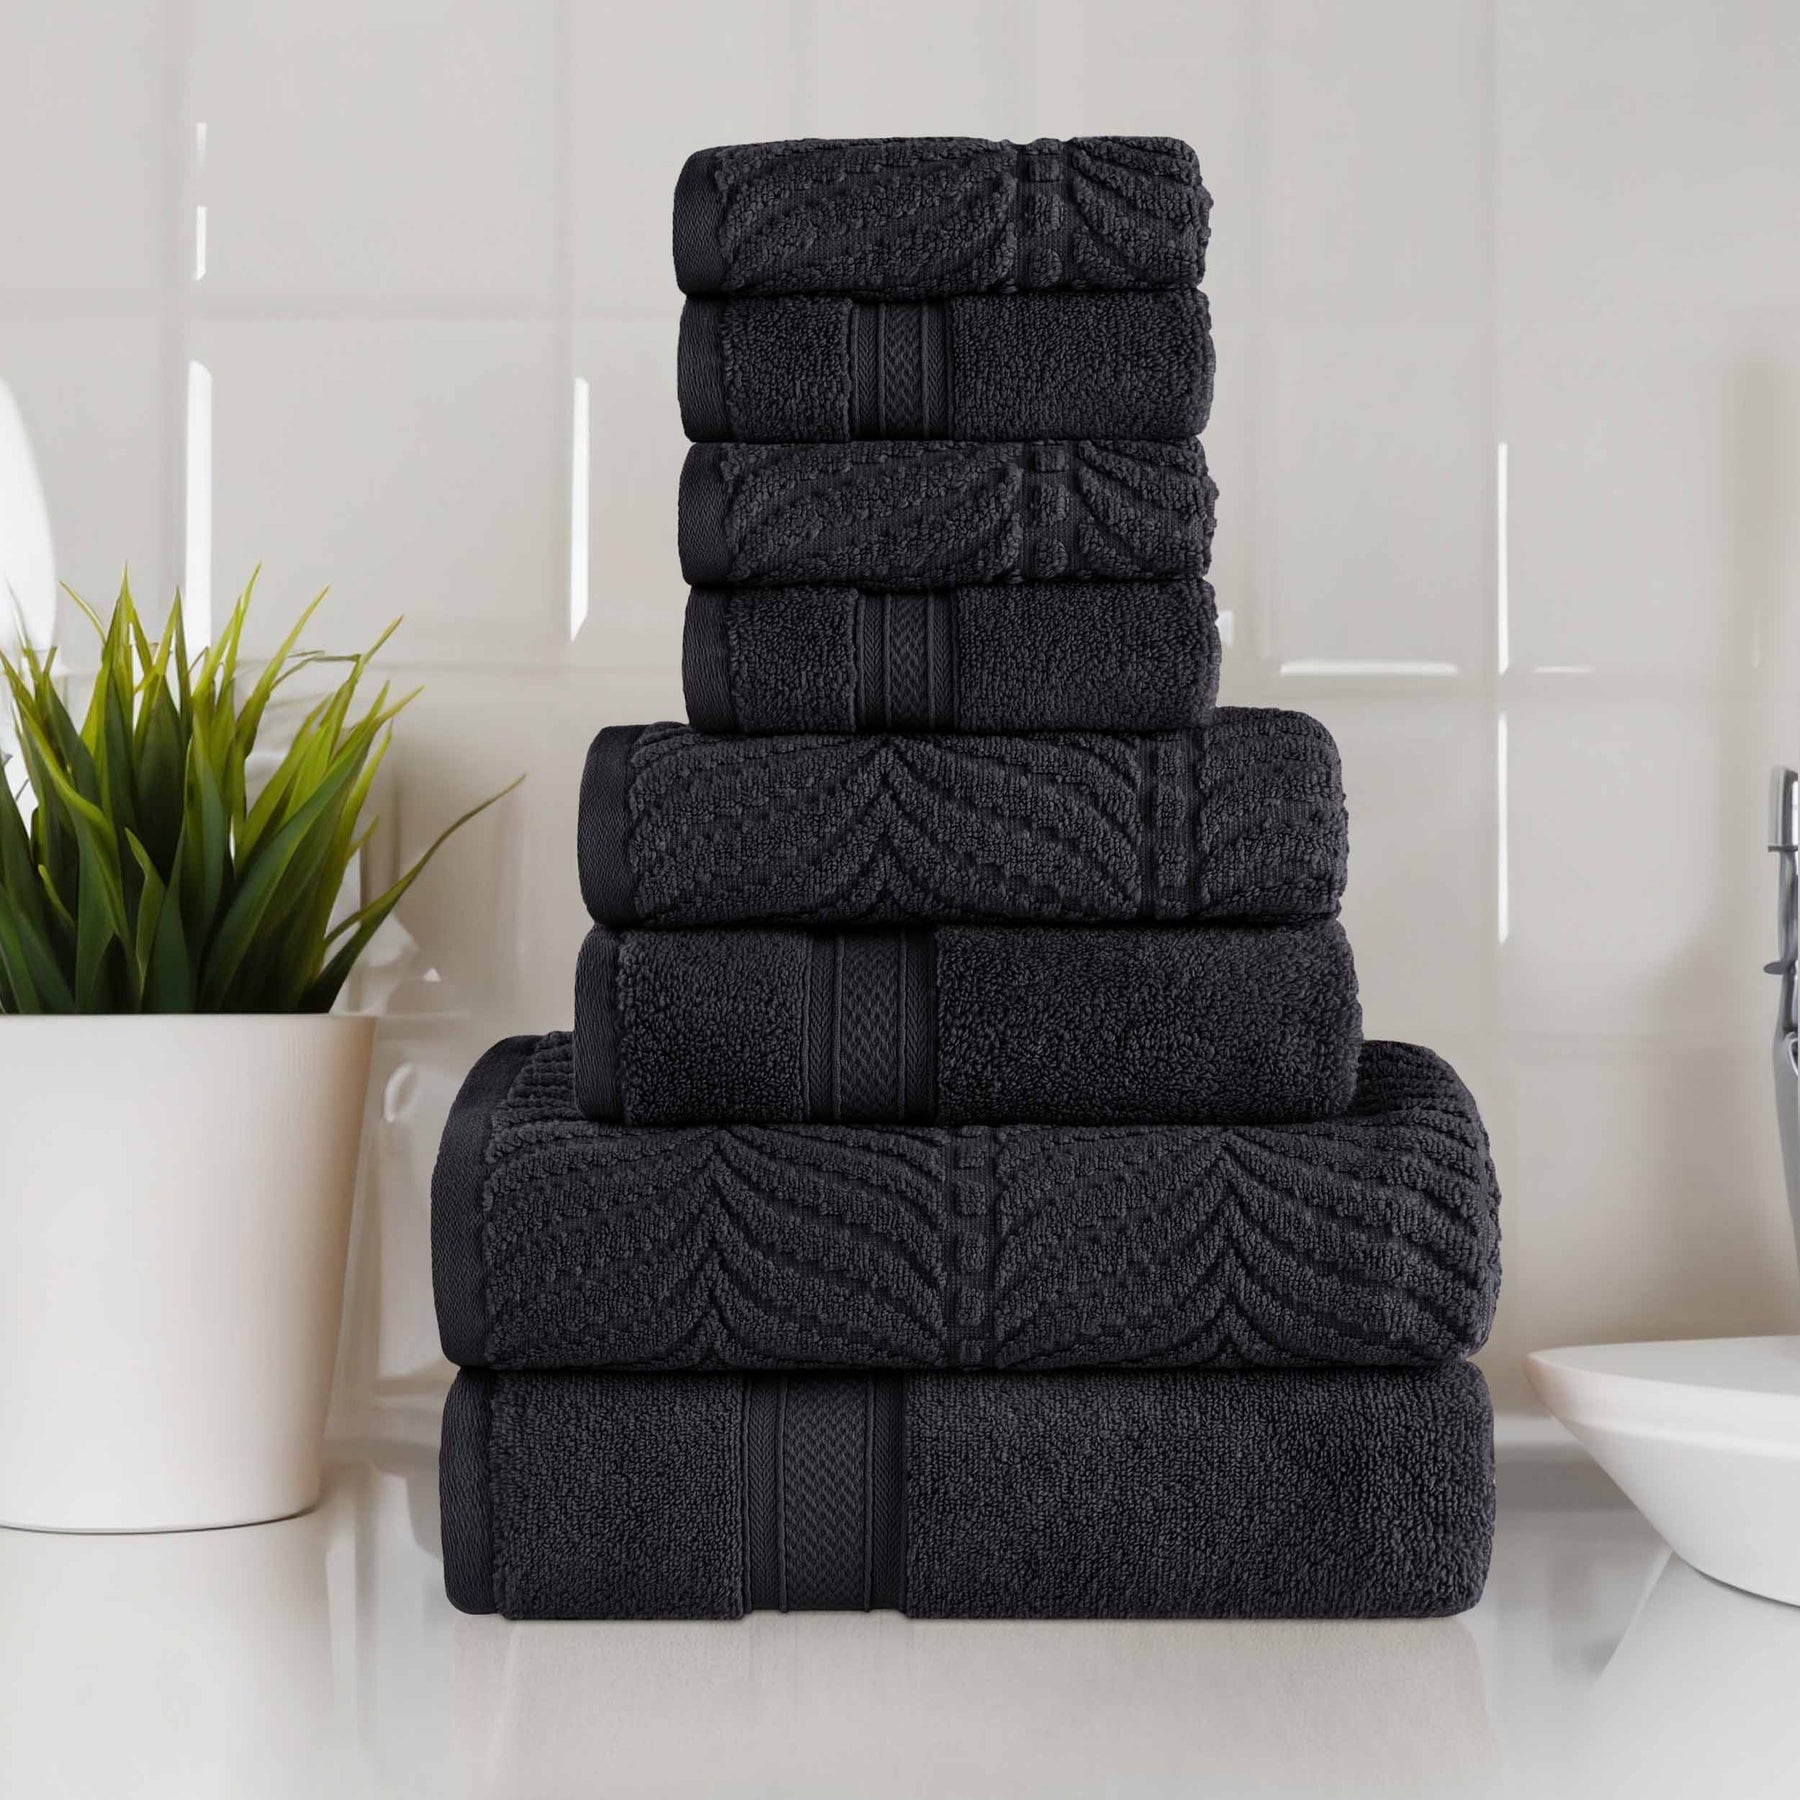 CHINO White Bath Towels Set, 2 Oversized Large Towels/2 Hand Towels/4  Washcloths,600 GSM Towels Bathroom Sets, Quick Dry Towel Super Soft  Absorbent